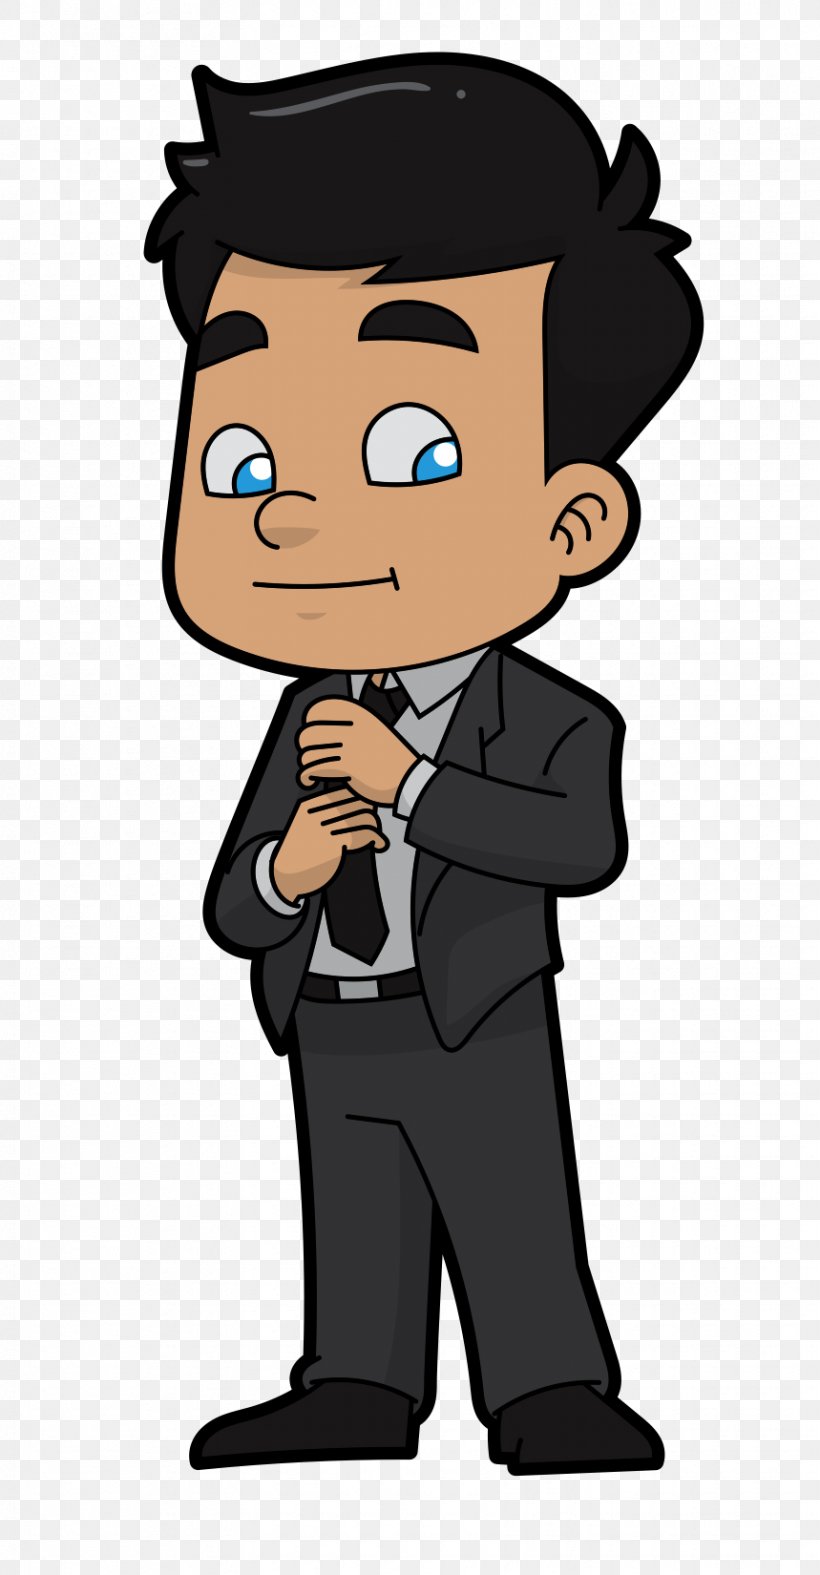 Businessperson Home Business Sales Clip Art, PNG, 859x1650px, Businessperson, Boy, Business, Cartoon, Fictional Character Download Free